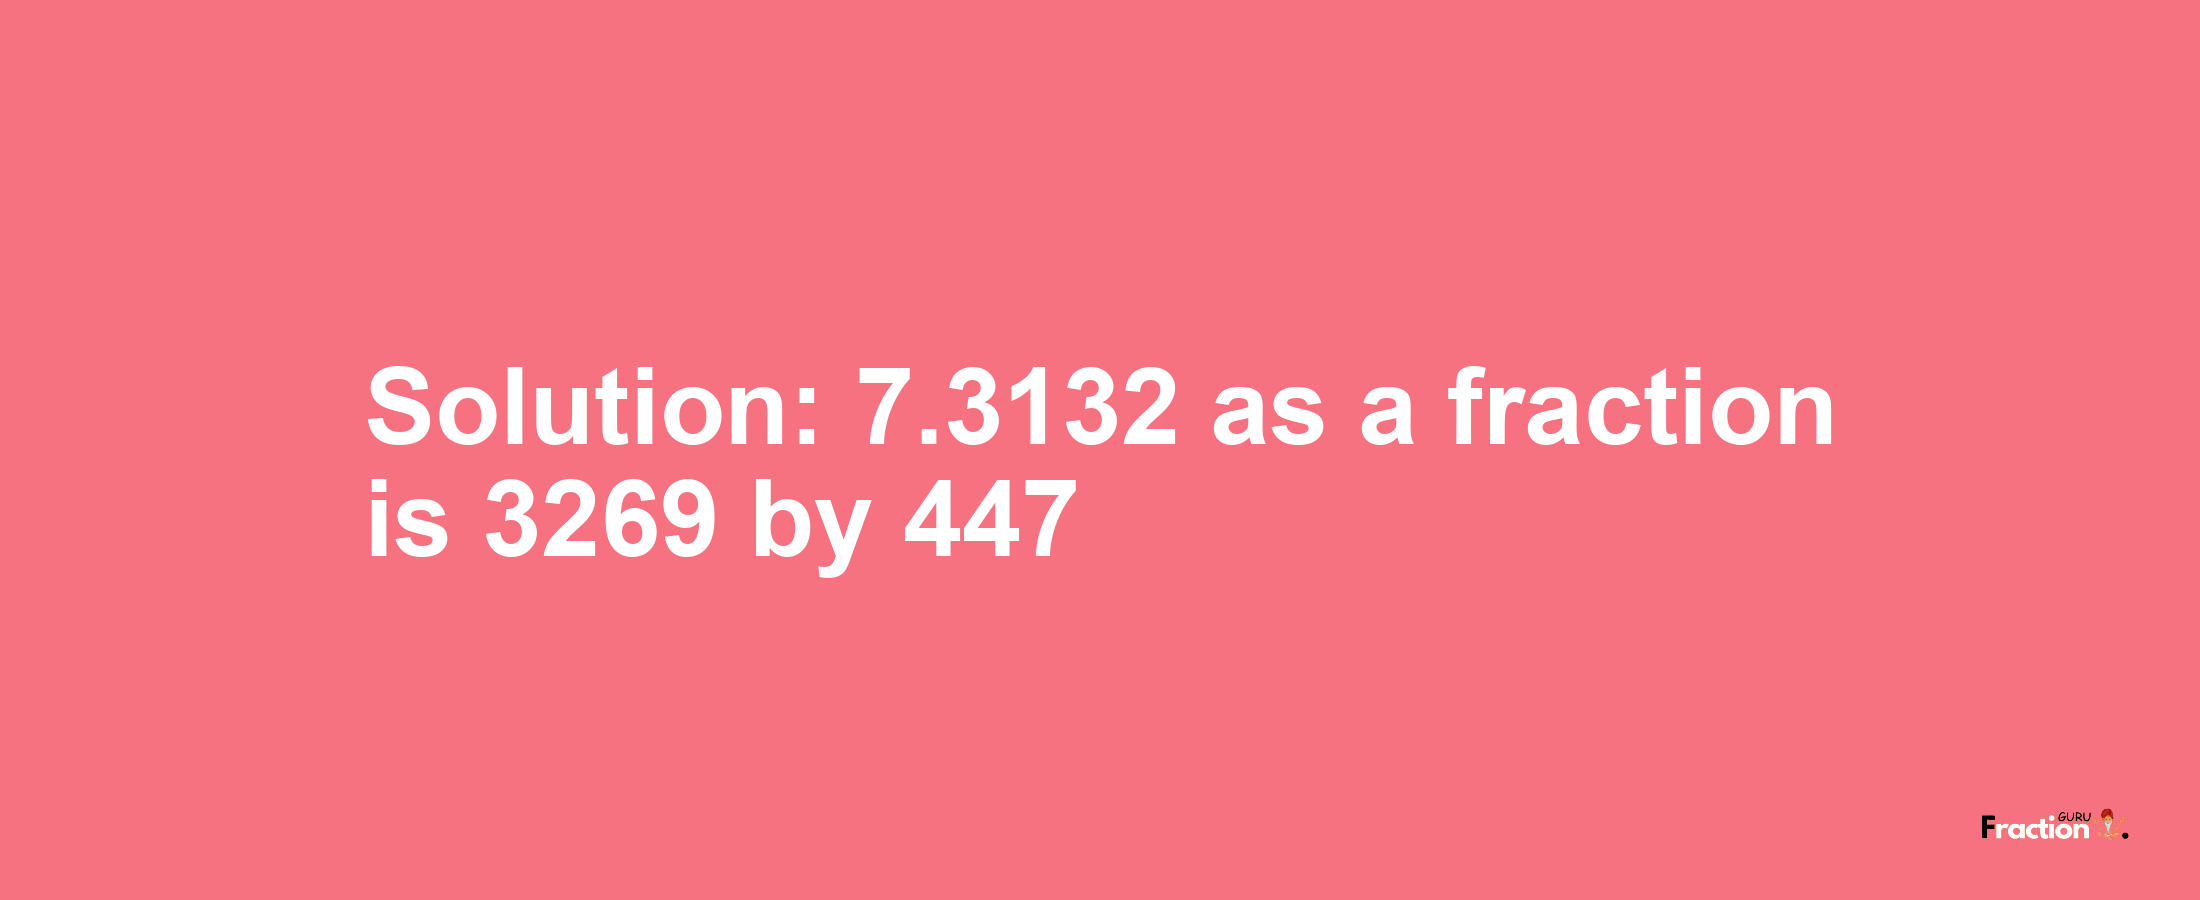 Solution:7.3132 as a fraction is 3269/447